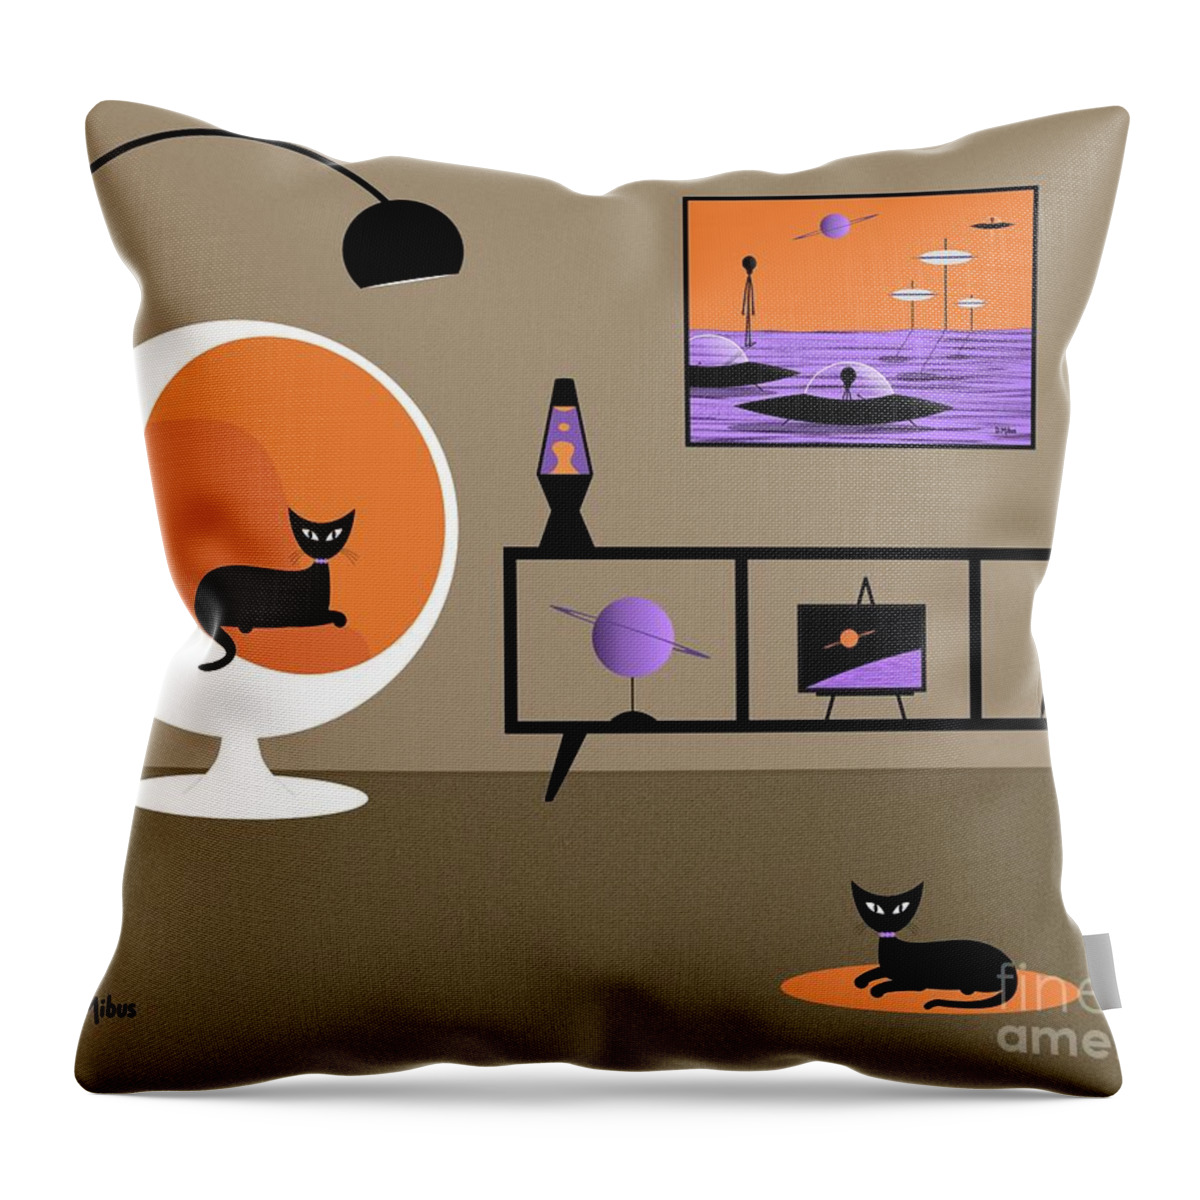 Mid Century Modern Throw Pillow featuring the digital art Mid Century Outer Space Room with Black Cats by Donna Mibus